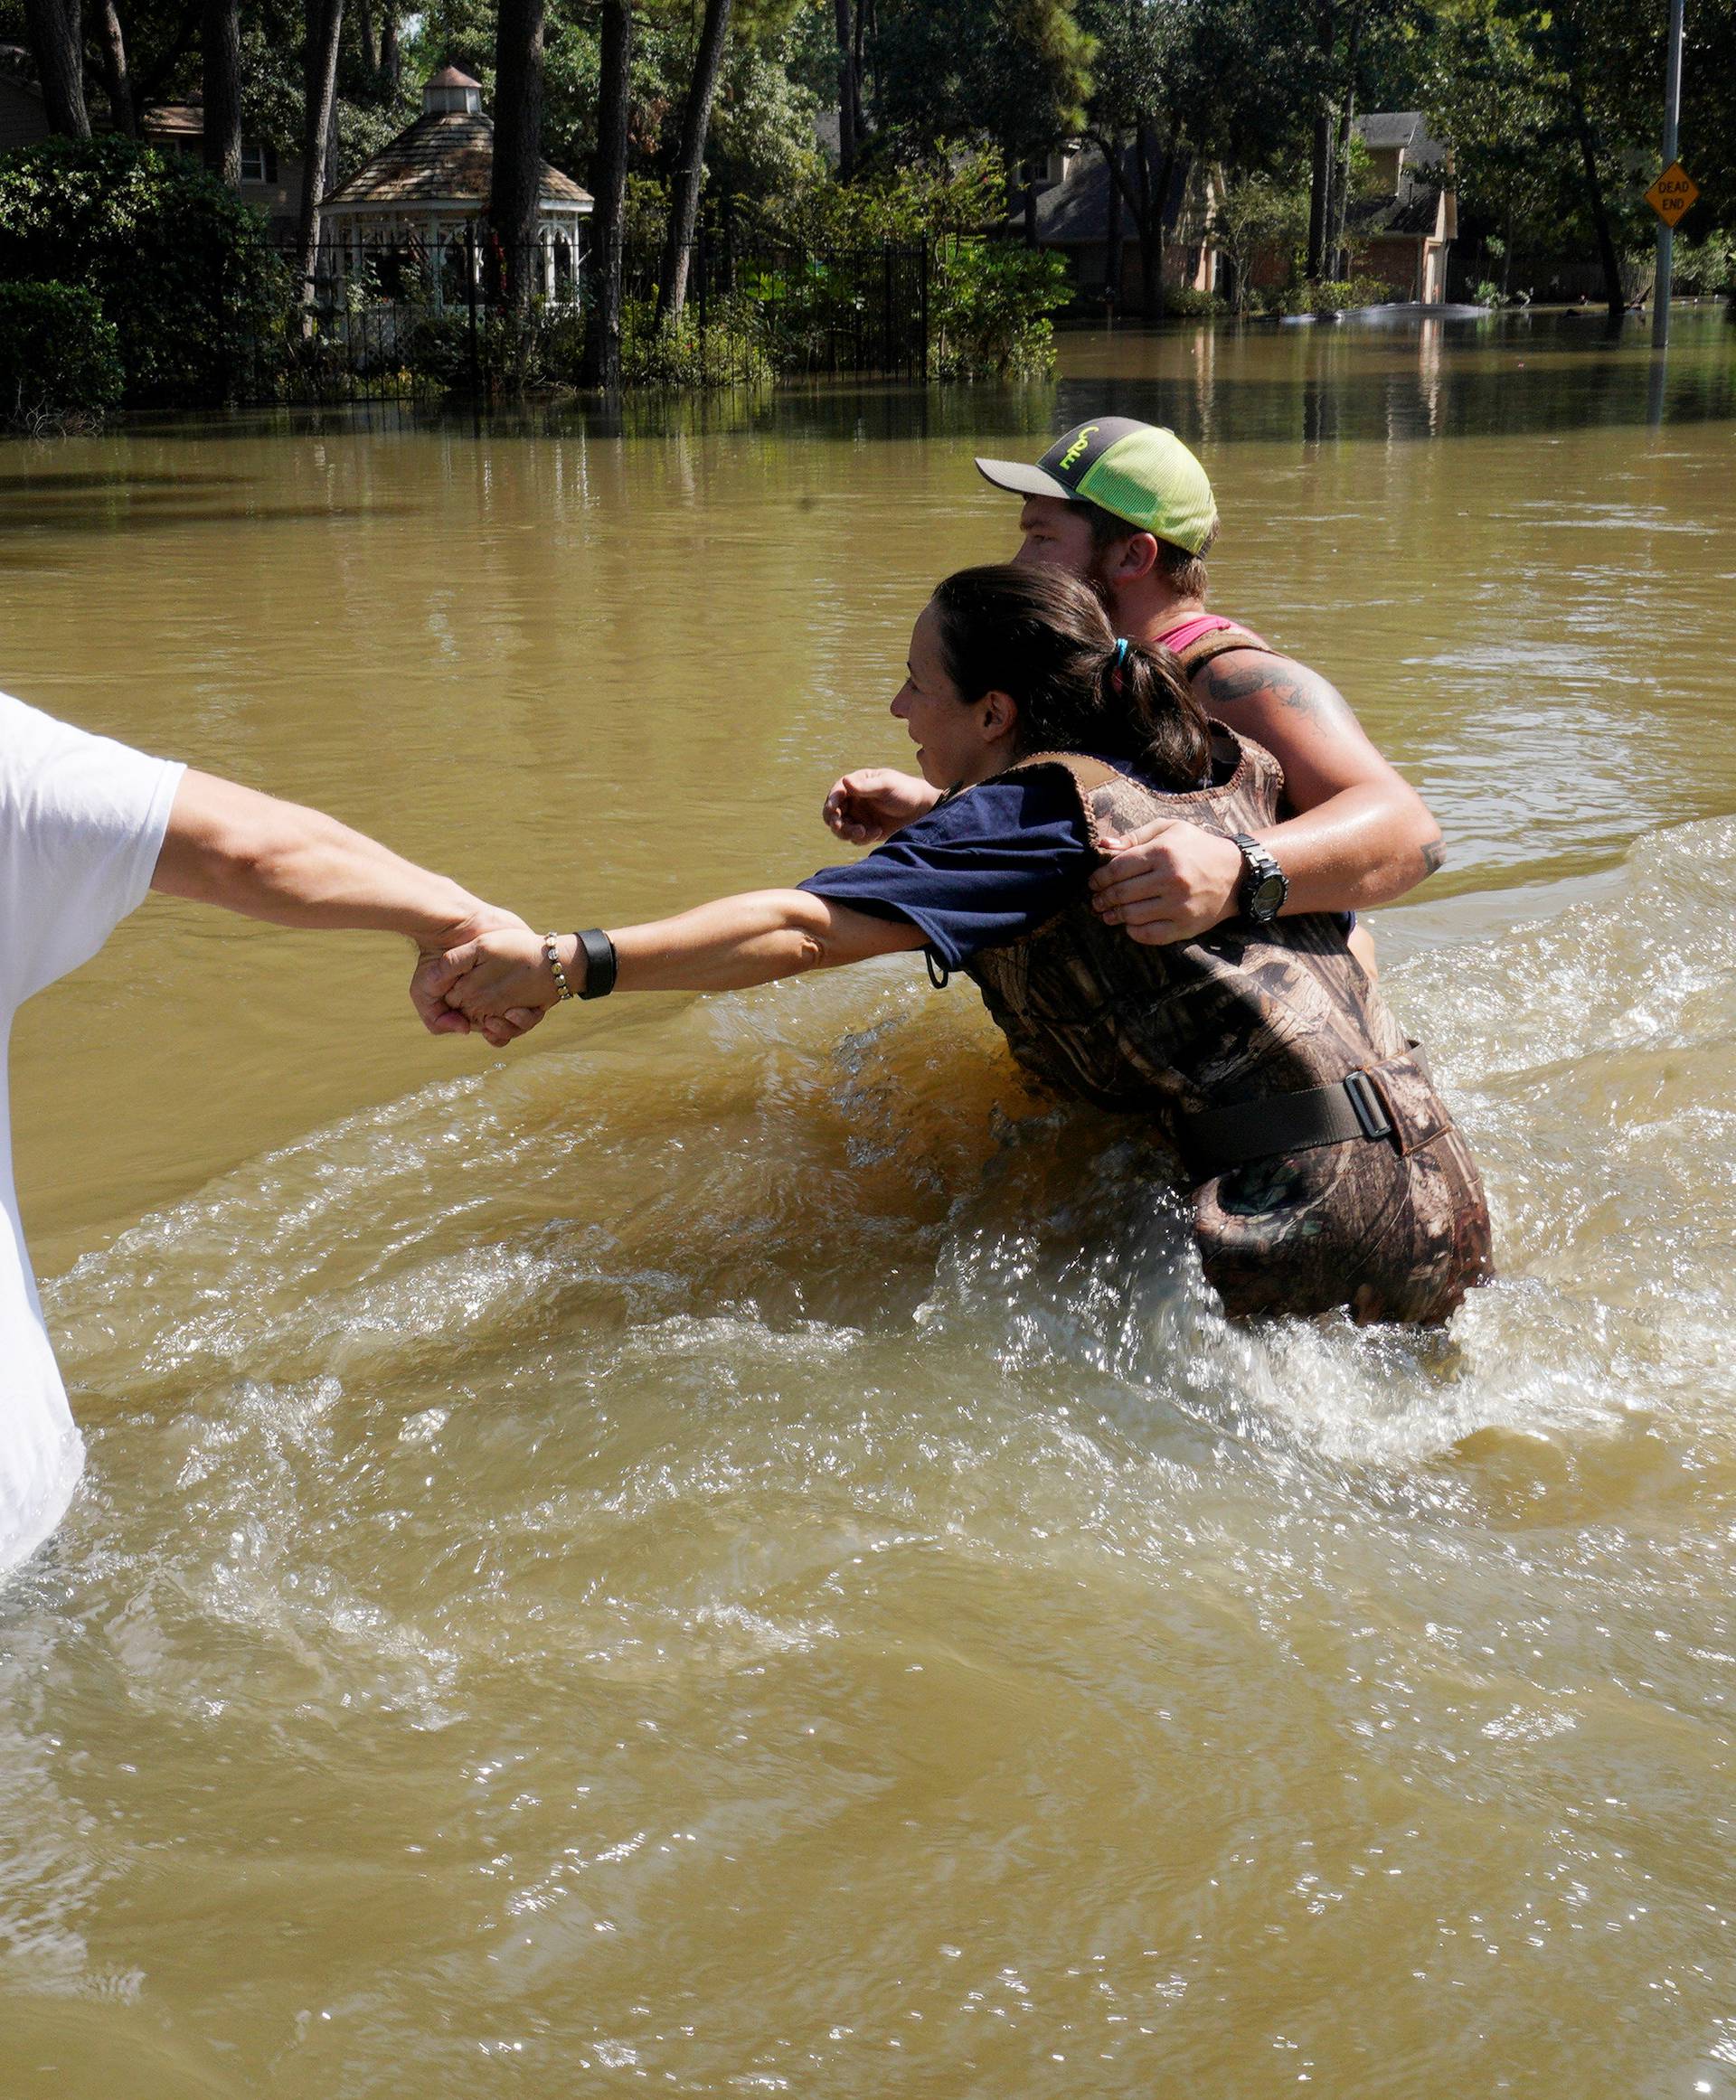 Melissa Ramirez struggles against the current flowing down a flooded street helped by Edward Ramirez and Cody Collinsworth as she tried to return to her home for the first time since Harvey floodwaters arrived in Houston